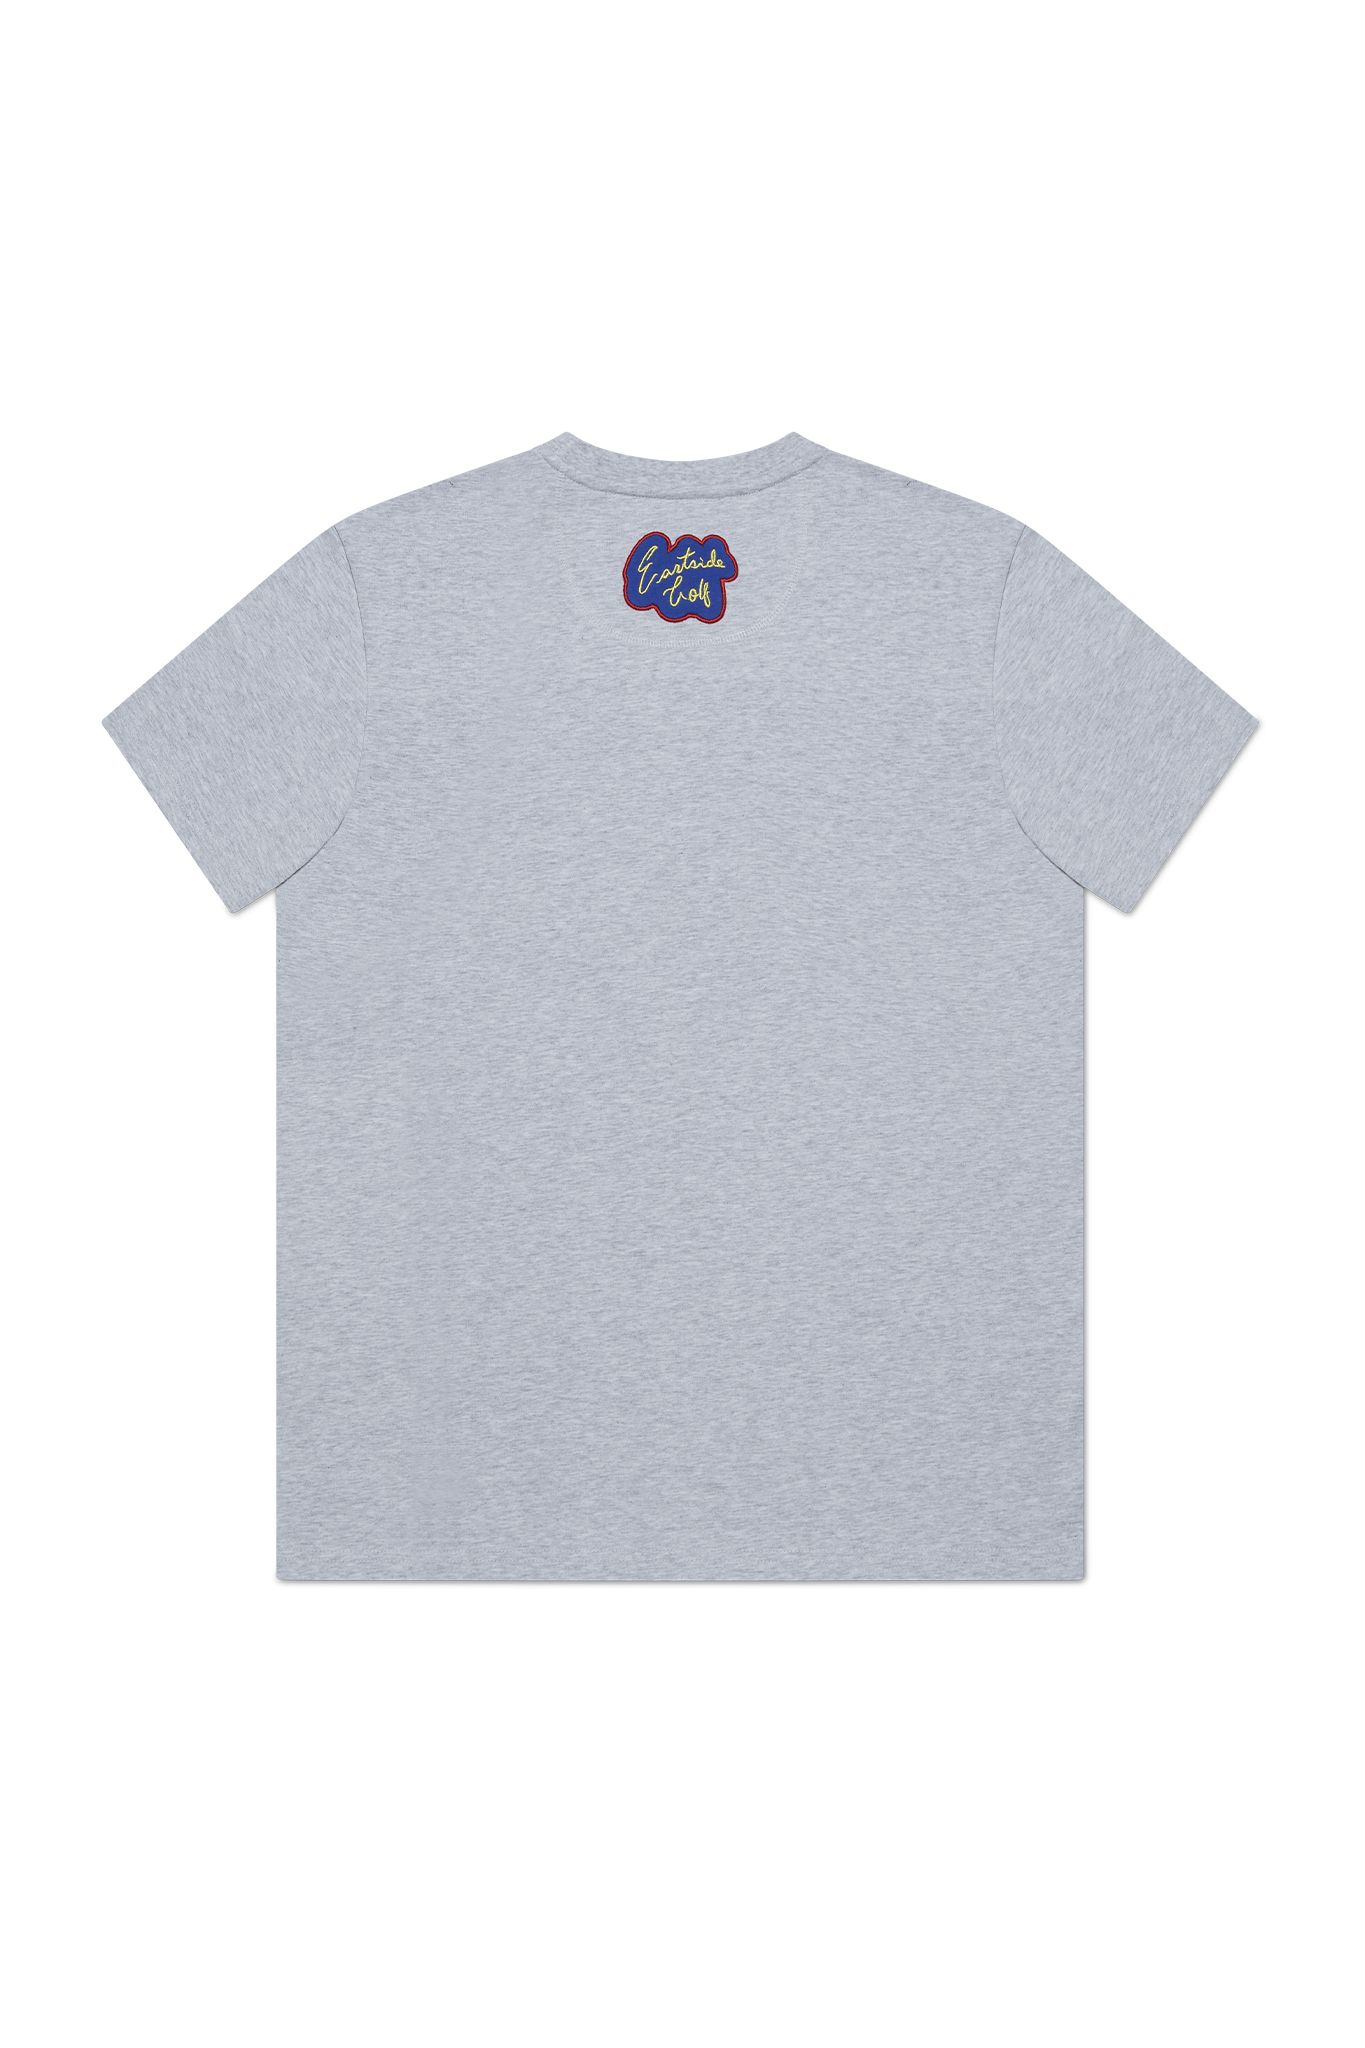 Eastside NBA - Playing Golf After This All Star Tee Grey – Eastside Golf